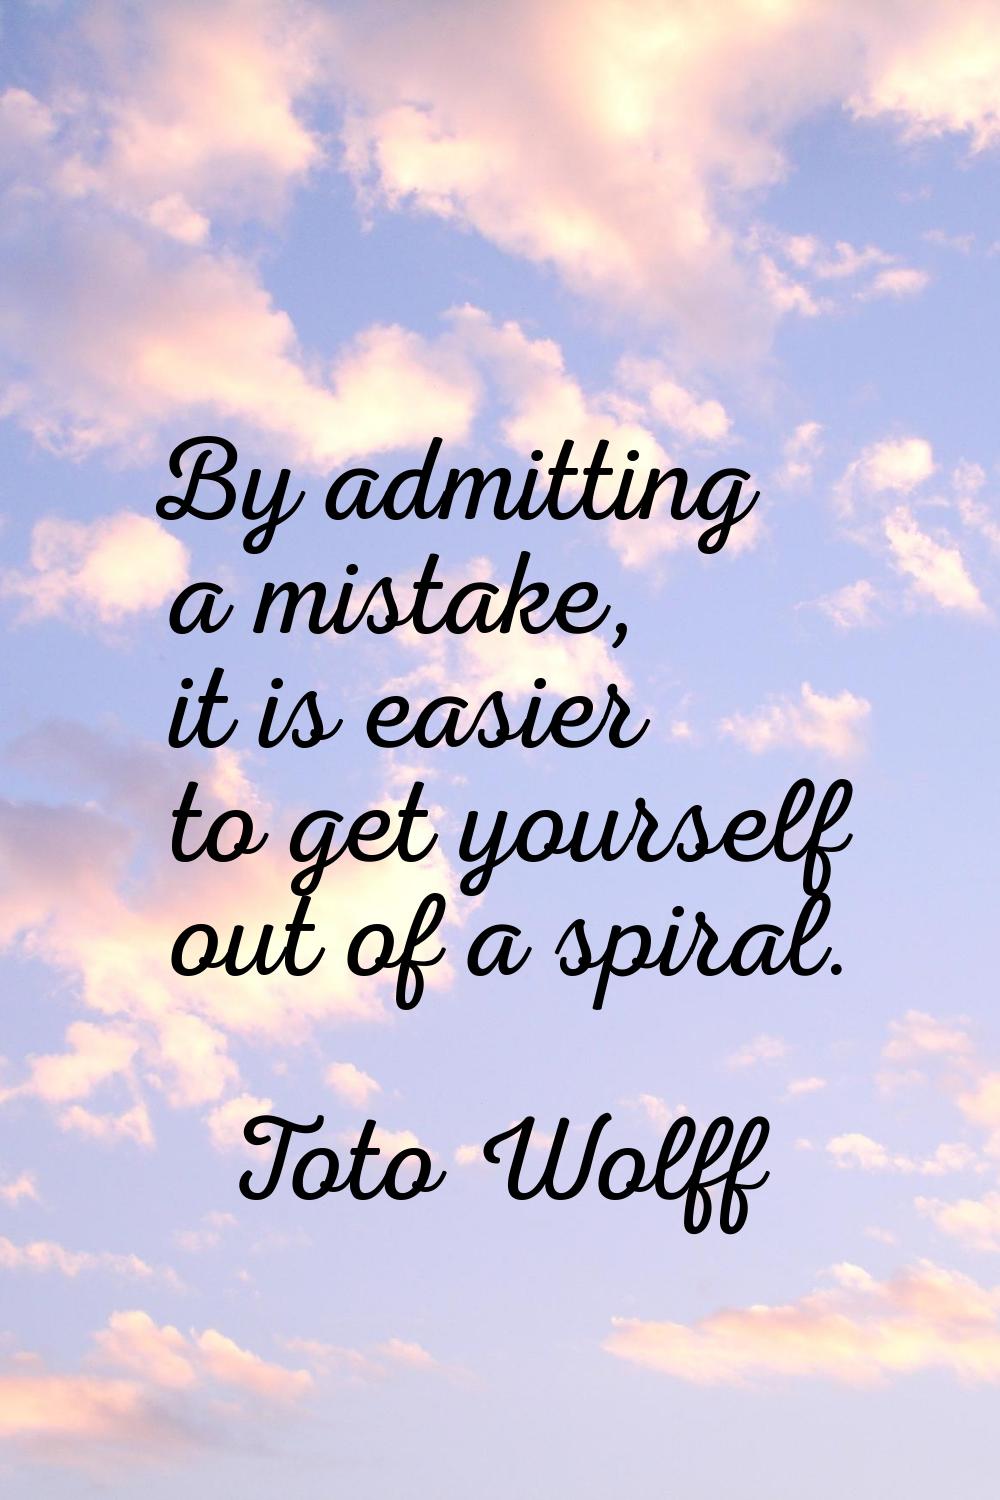 By admitting a mistake, it is easier to get yourself out of a spiral.